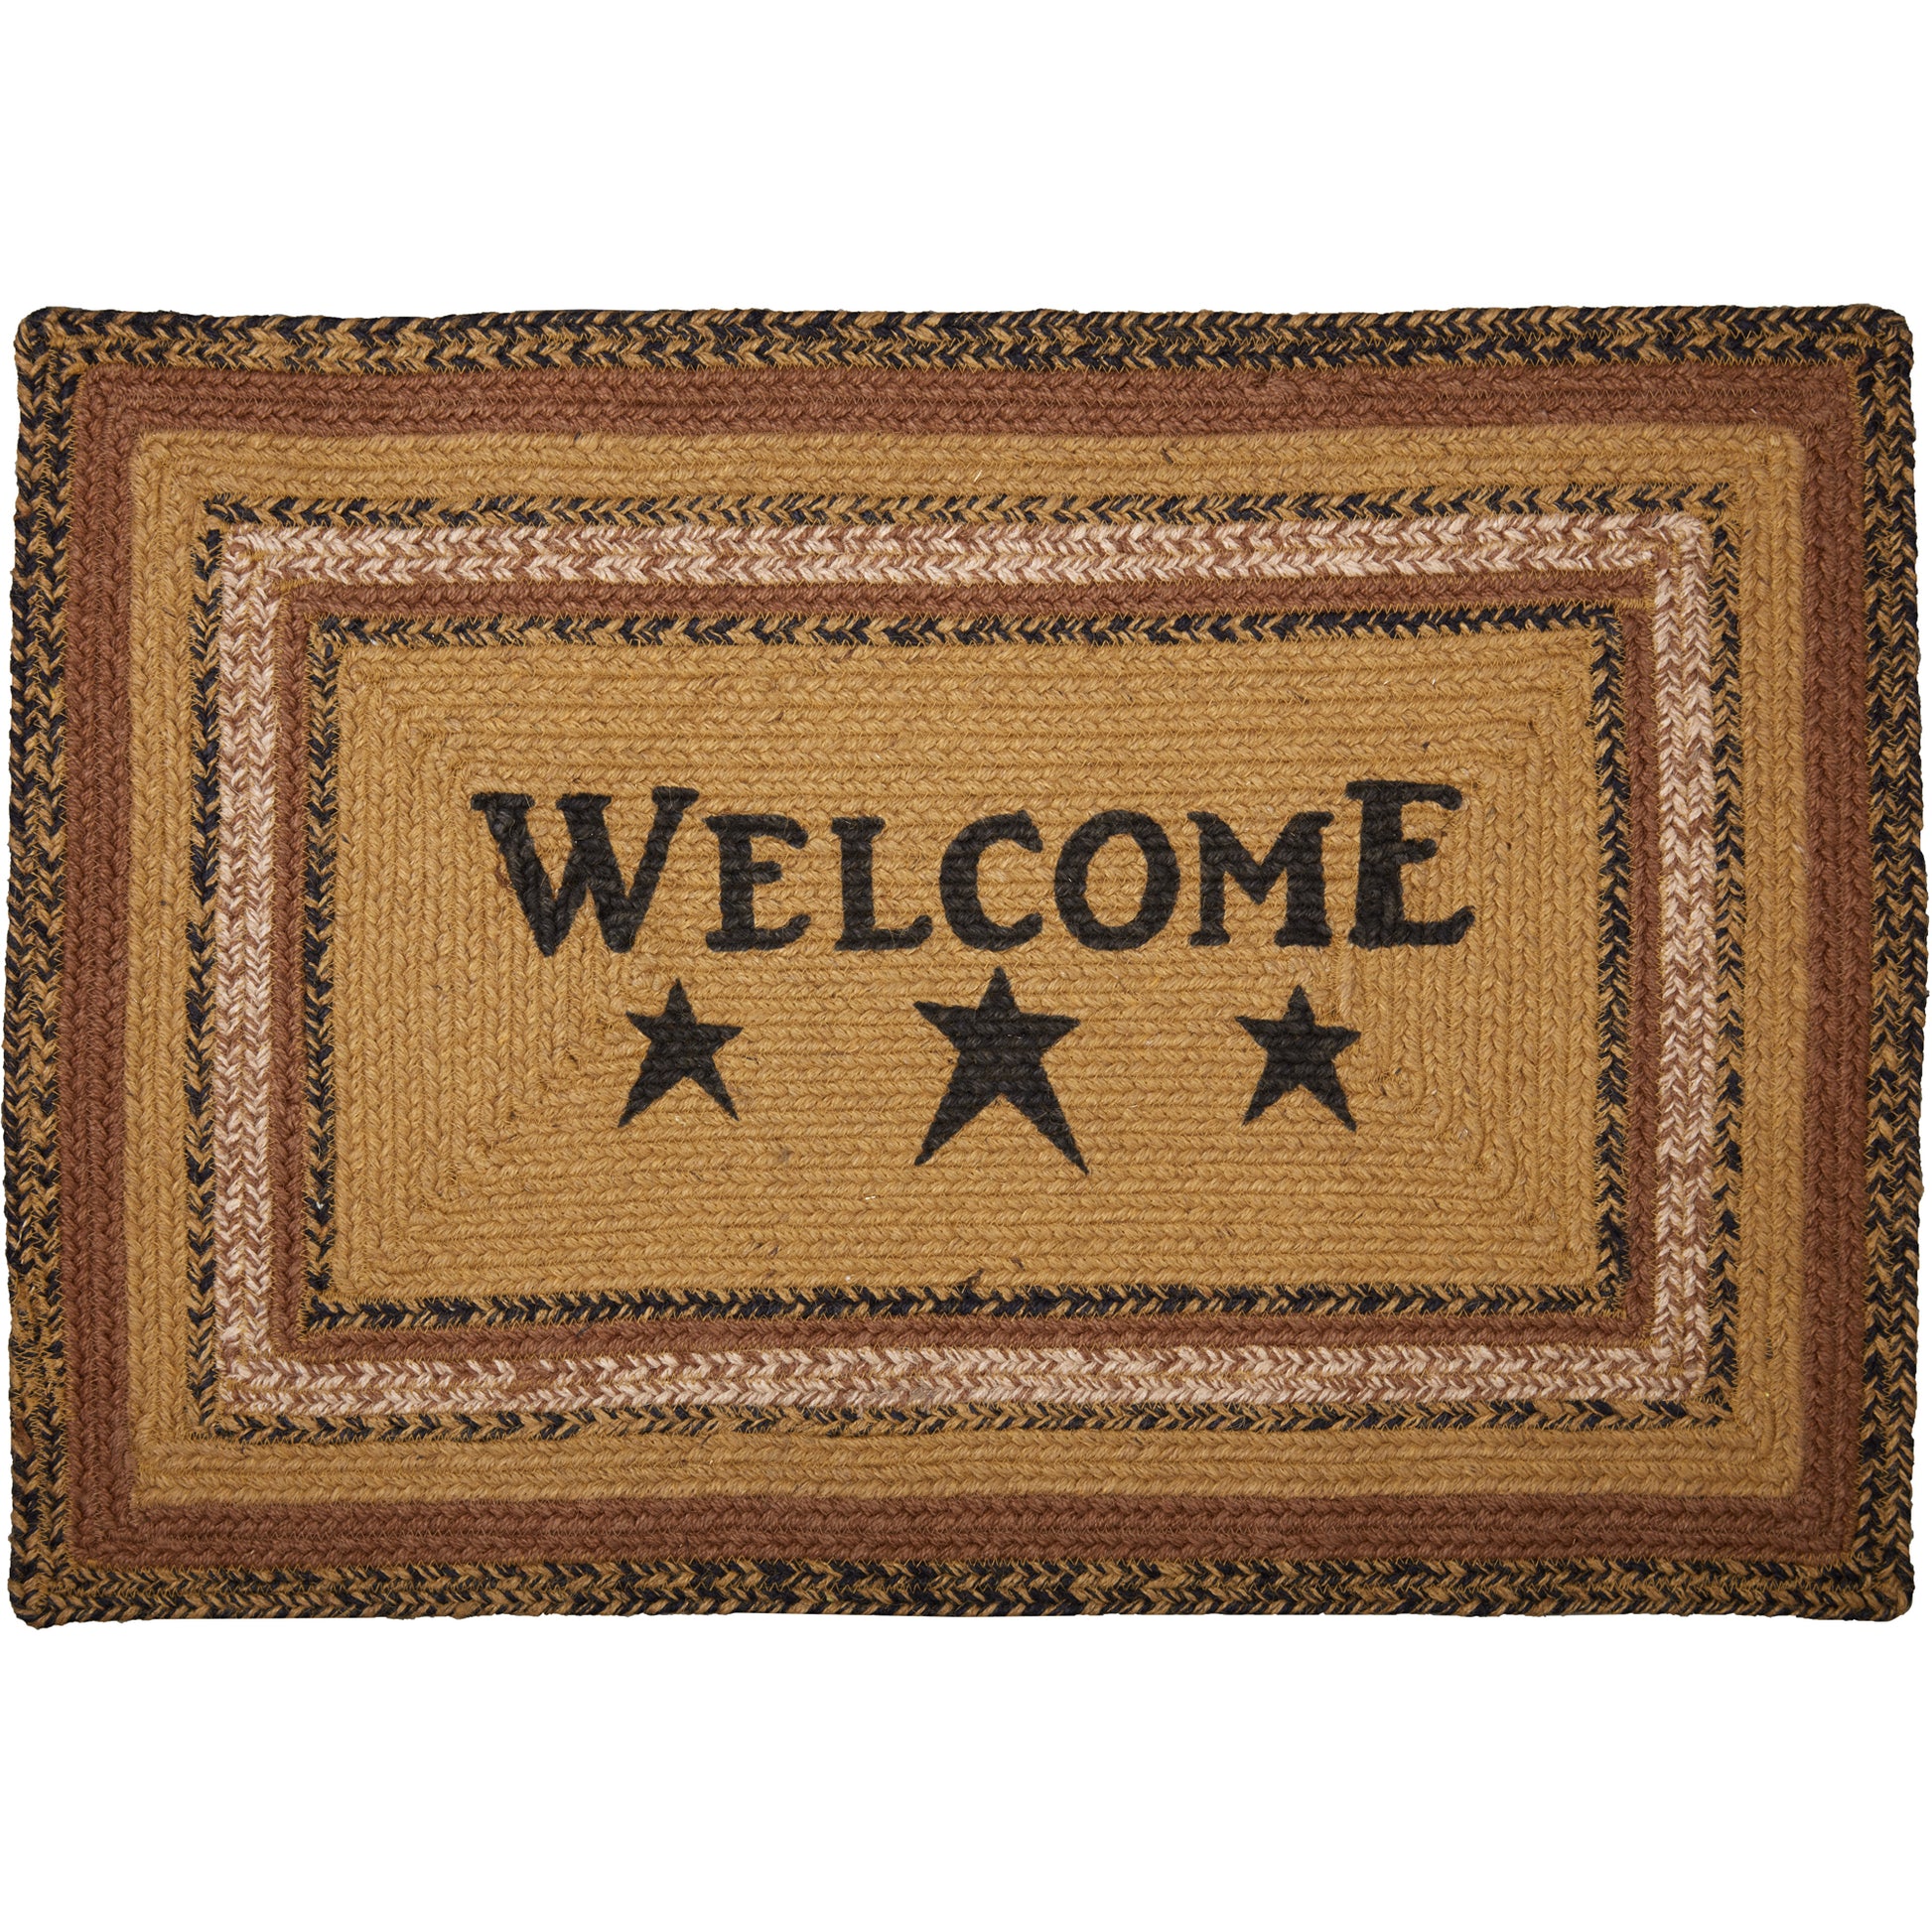 69793-Kettle-Grove-Jute-Rug-Rect-Stencil-Welcome-w-Pad-20x30-image-1